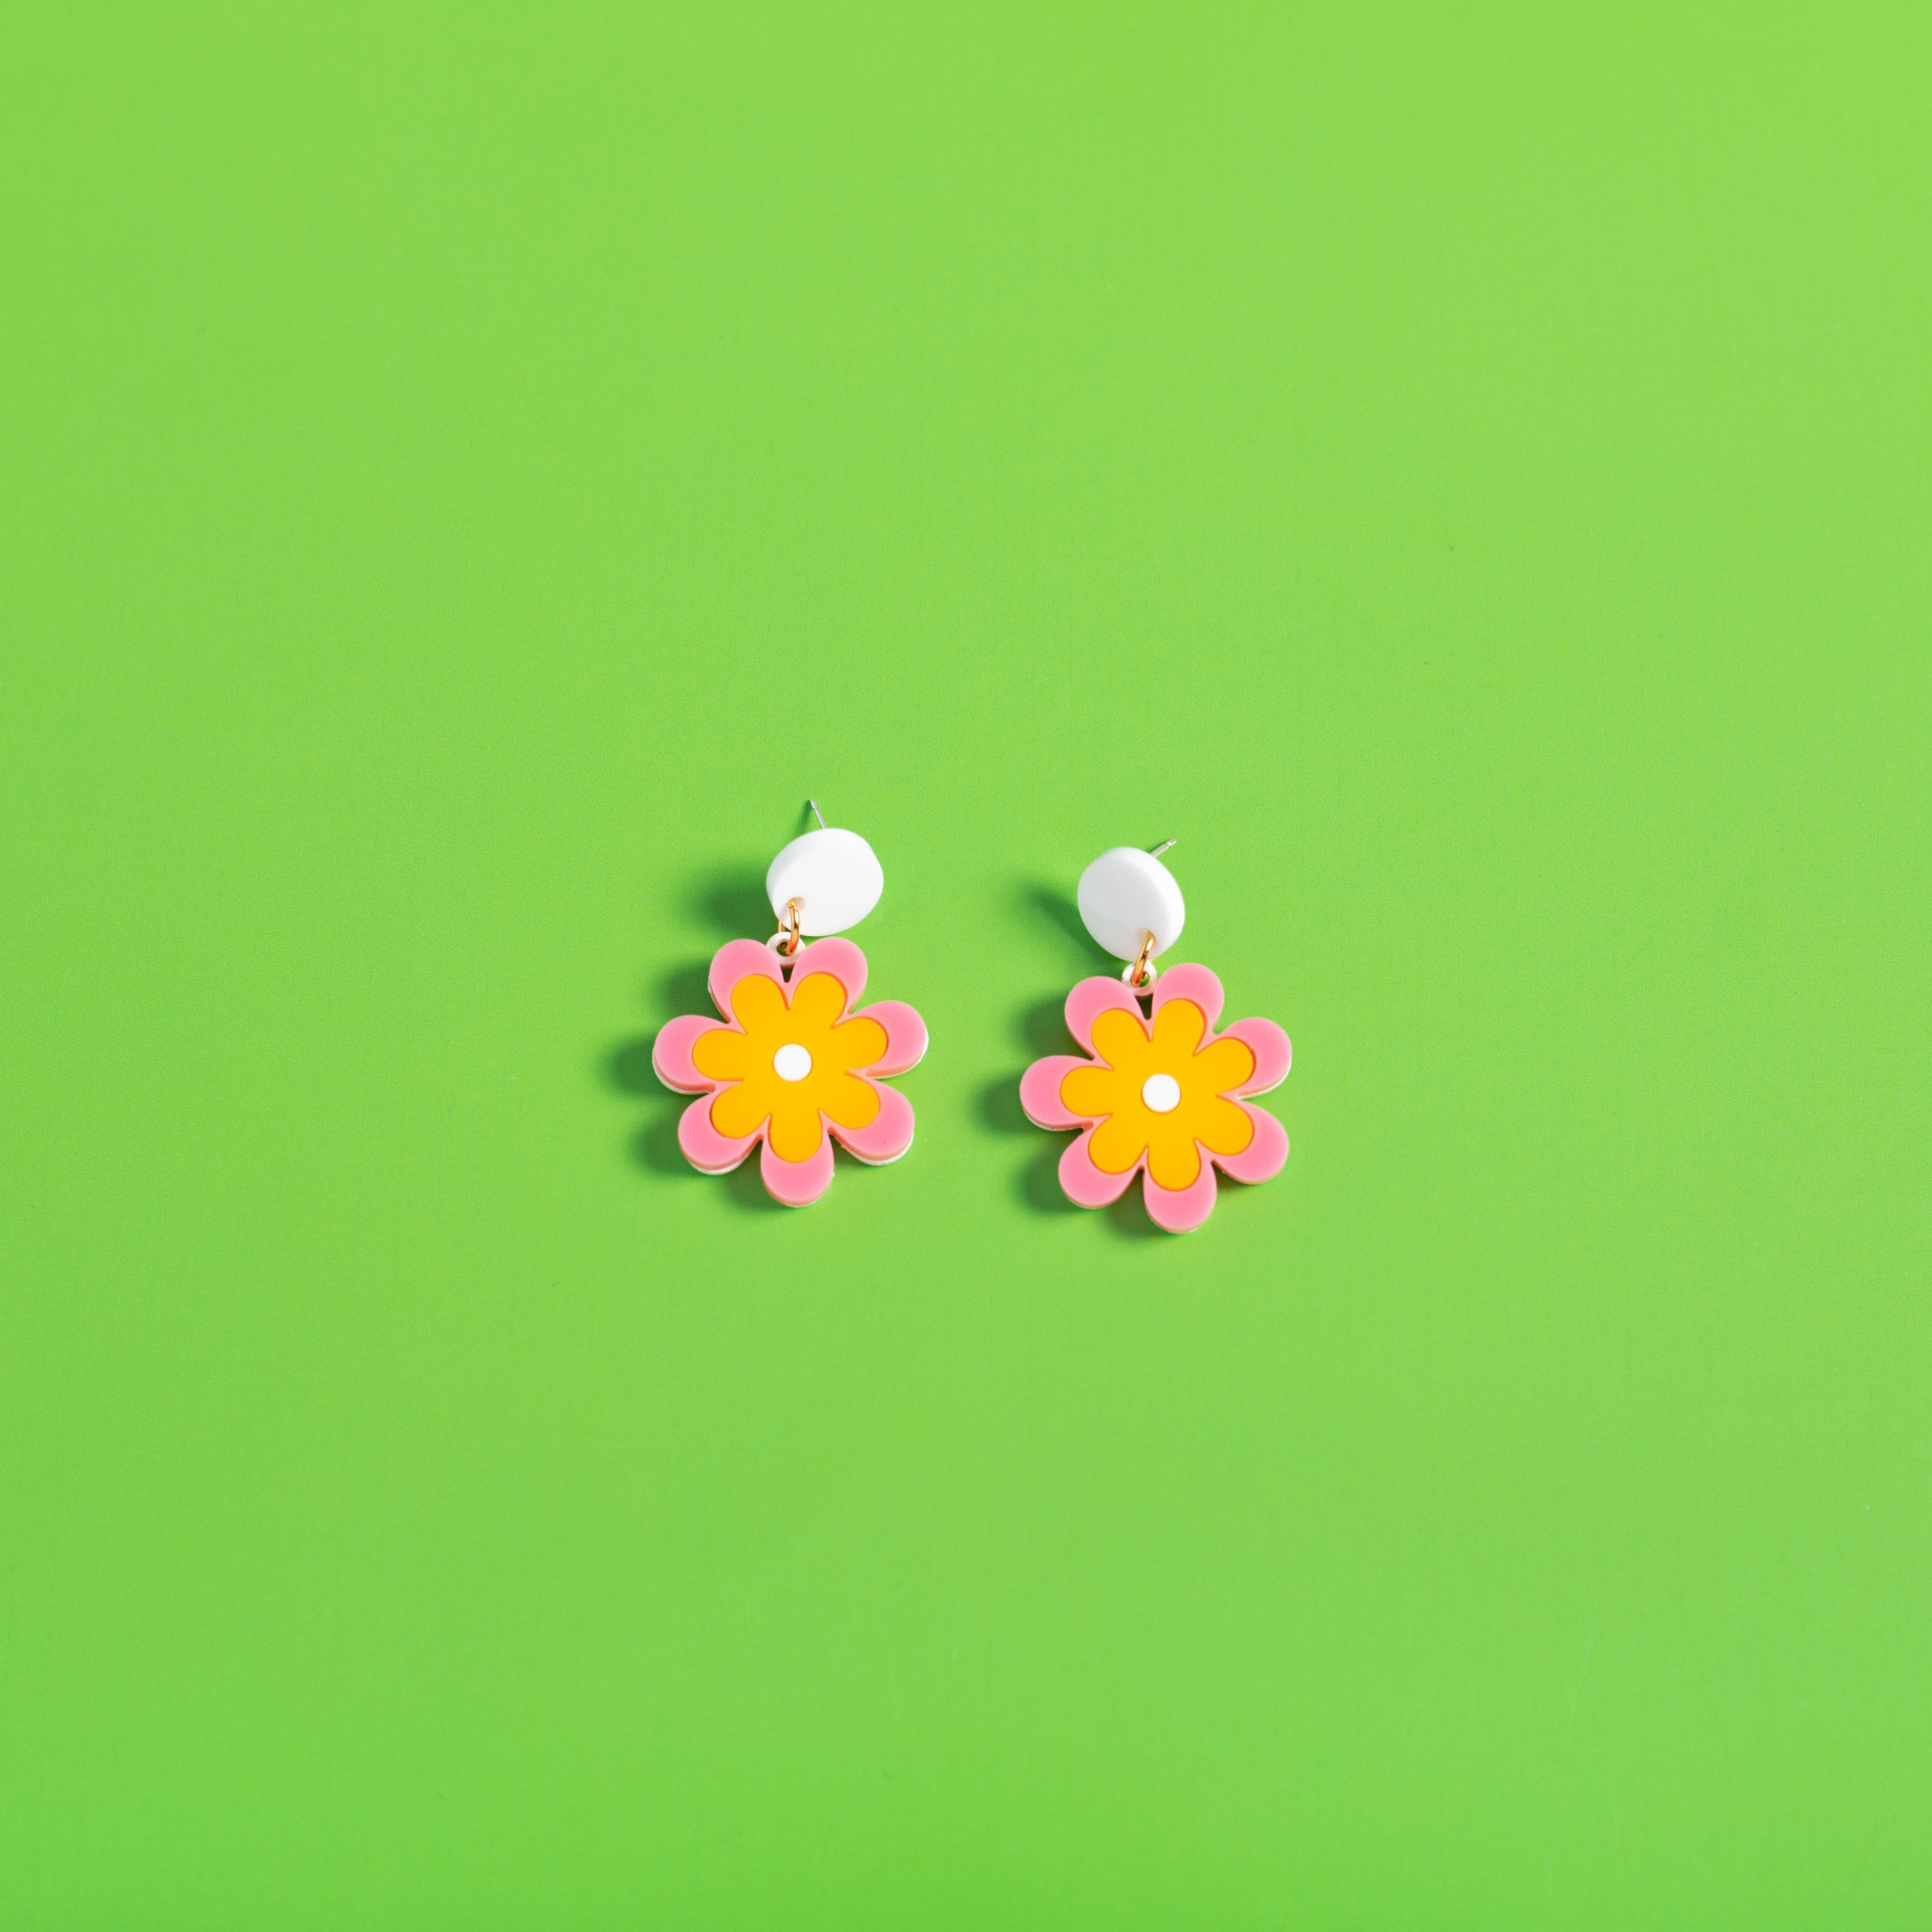 The Baby Candy Daisy Hanging Stud Earrings,EarringMindFlowers